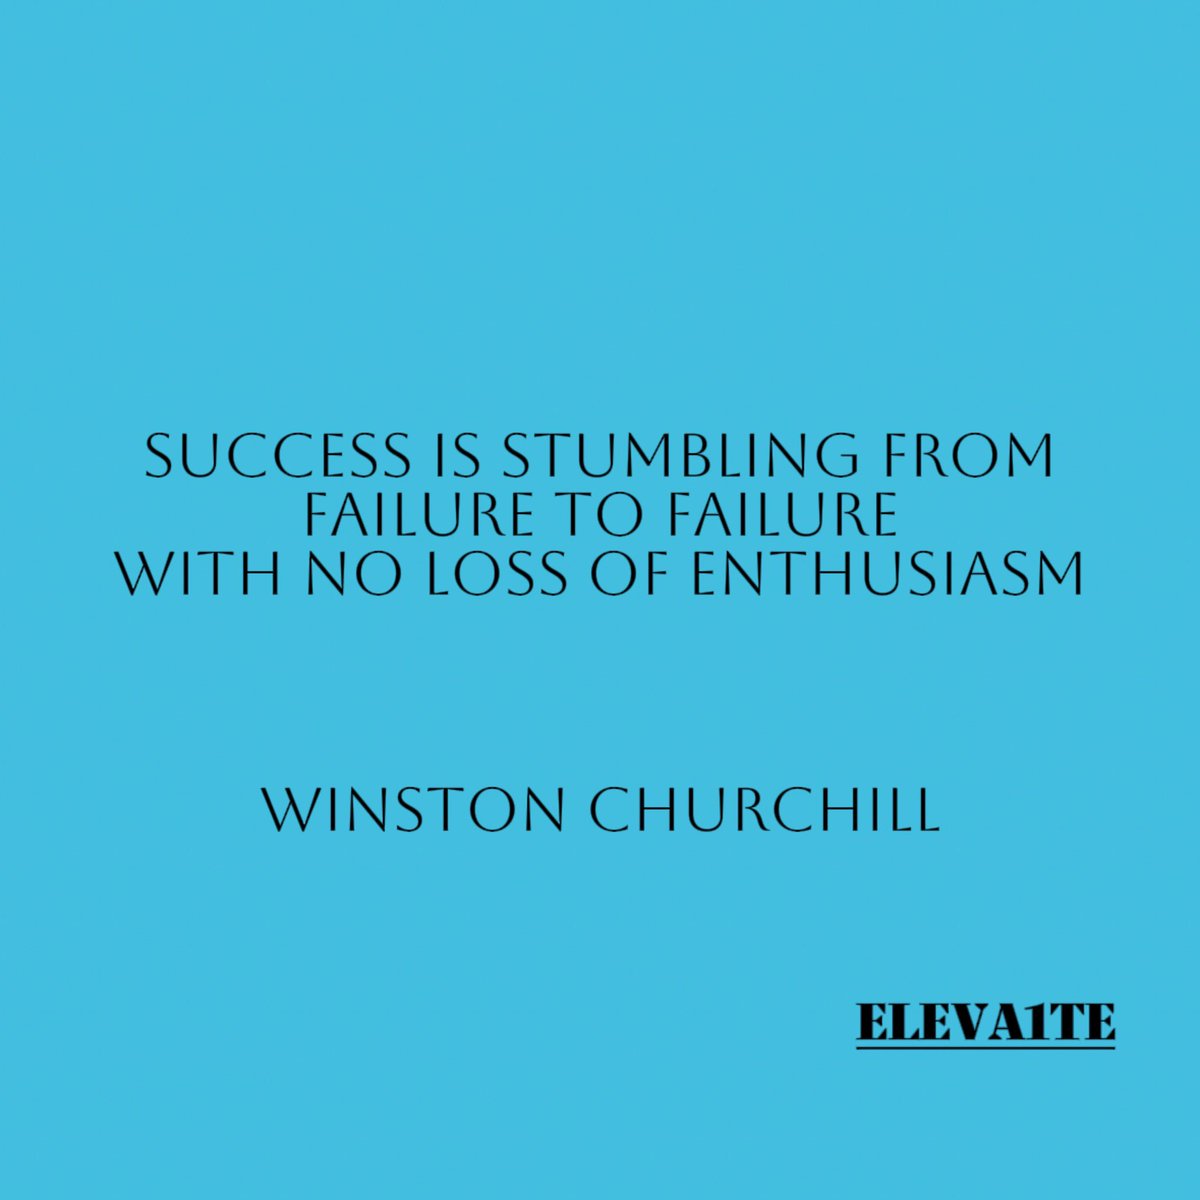 Persist With Passion Embracing Failure On The Road To Success #eleva1te #eleva1te100 #r1zefocusconquer #motivation #motivationalquotes #motivationquotes #motivateyourself #chosenone #consistencyiskey #hardworkpaysoff #RiseTogether #dreamchaser #LearnAndGrind #grind #grindset